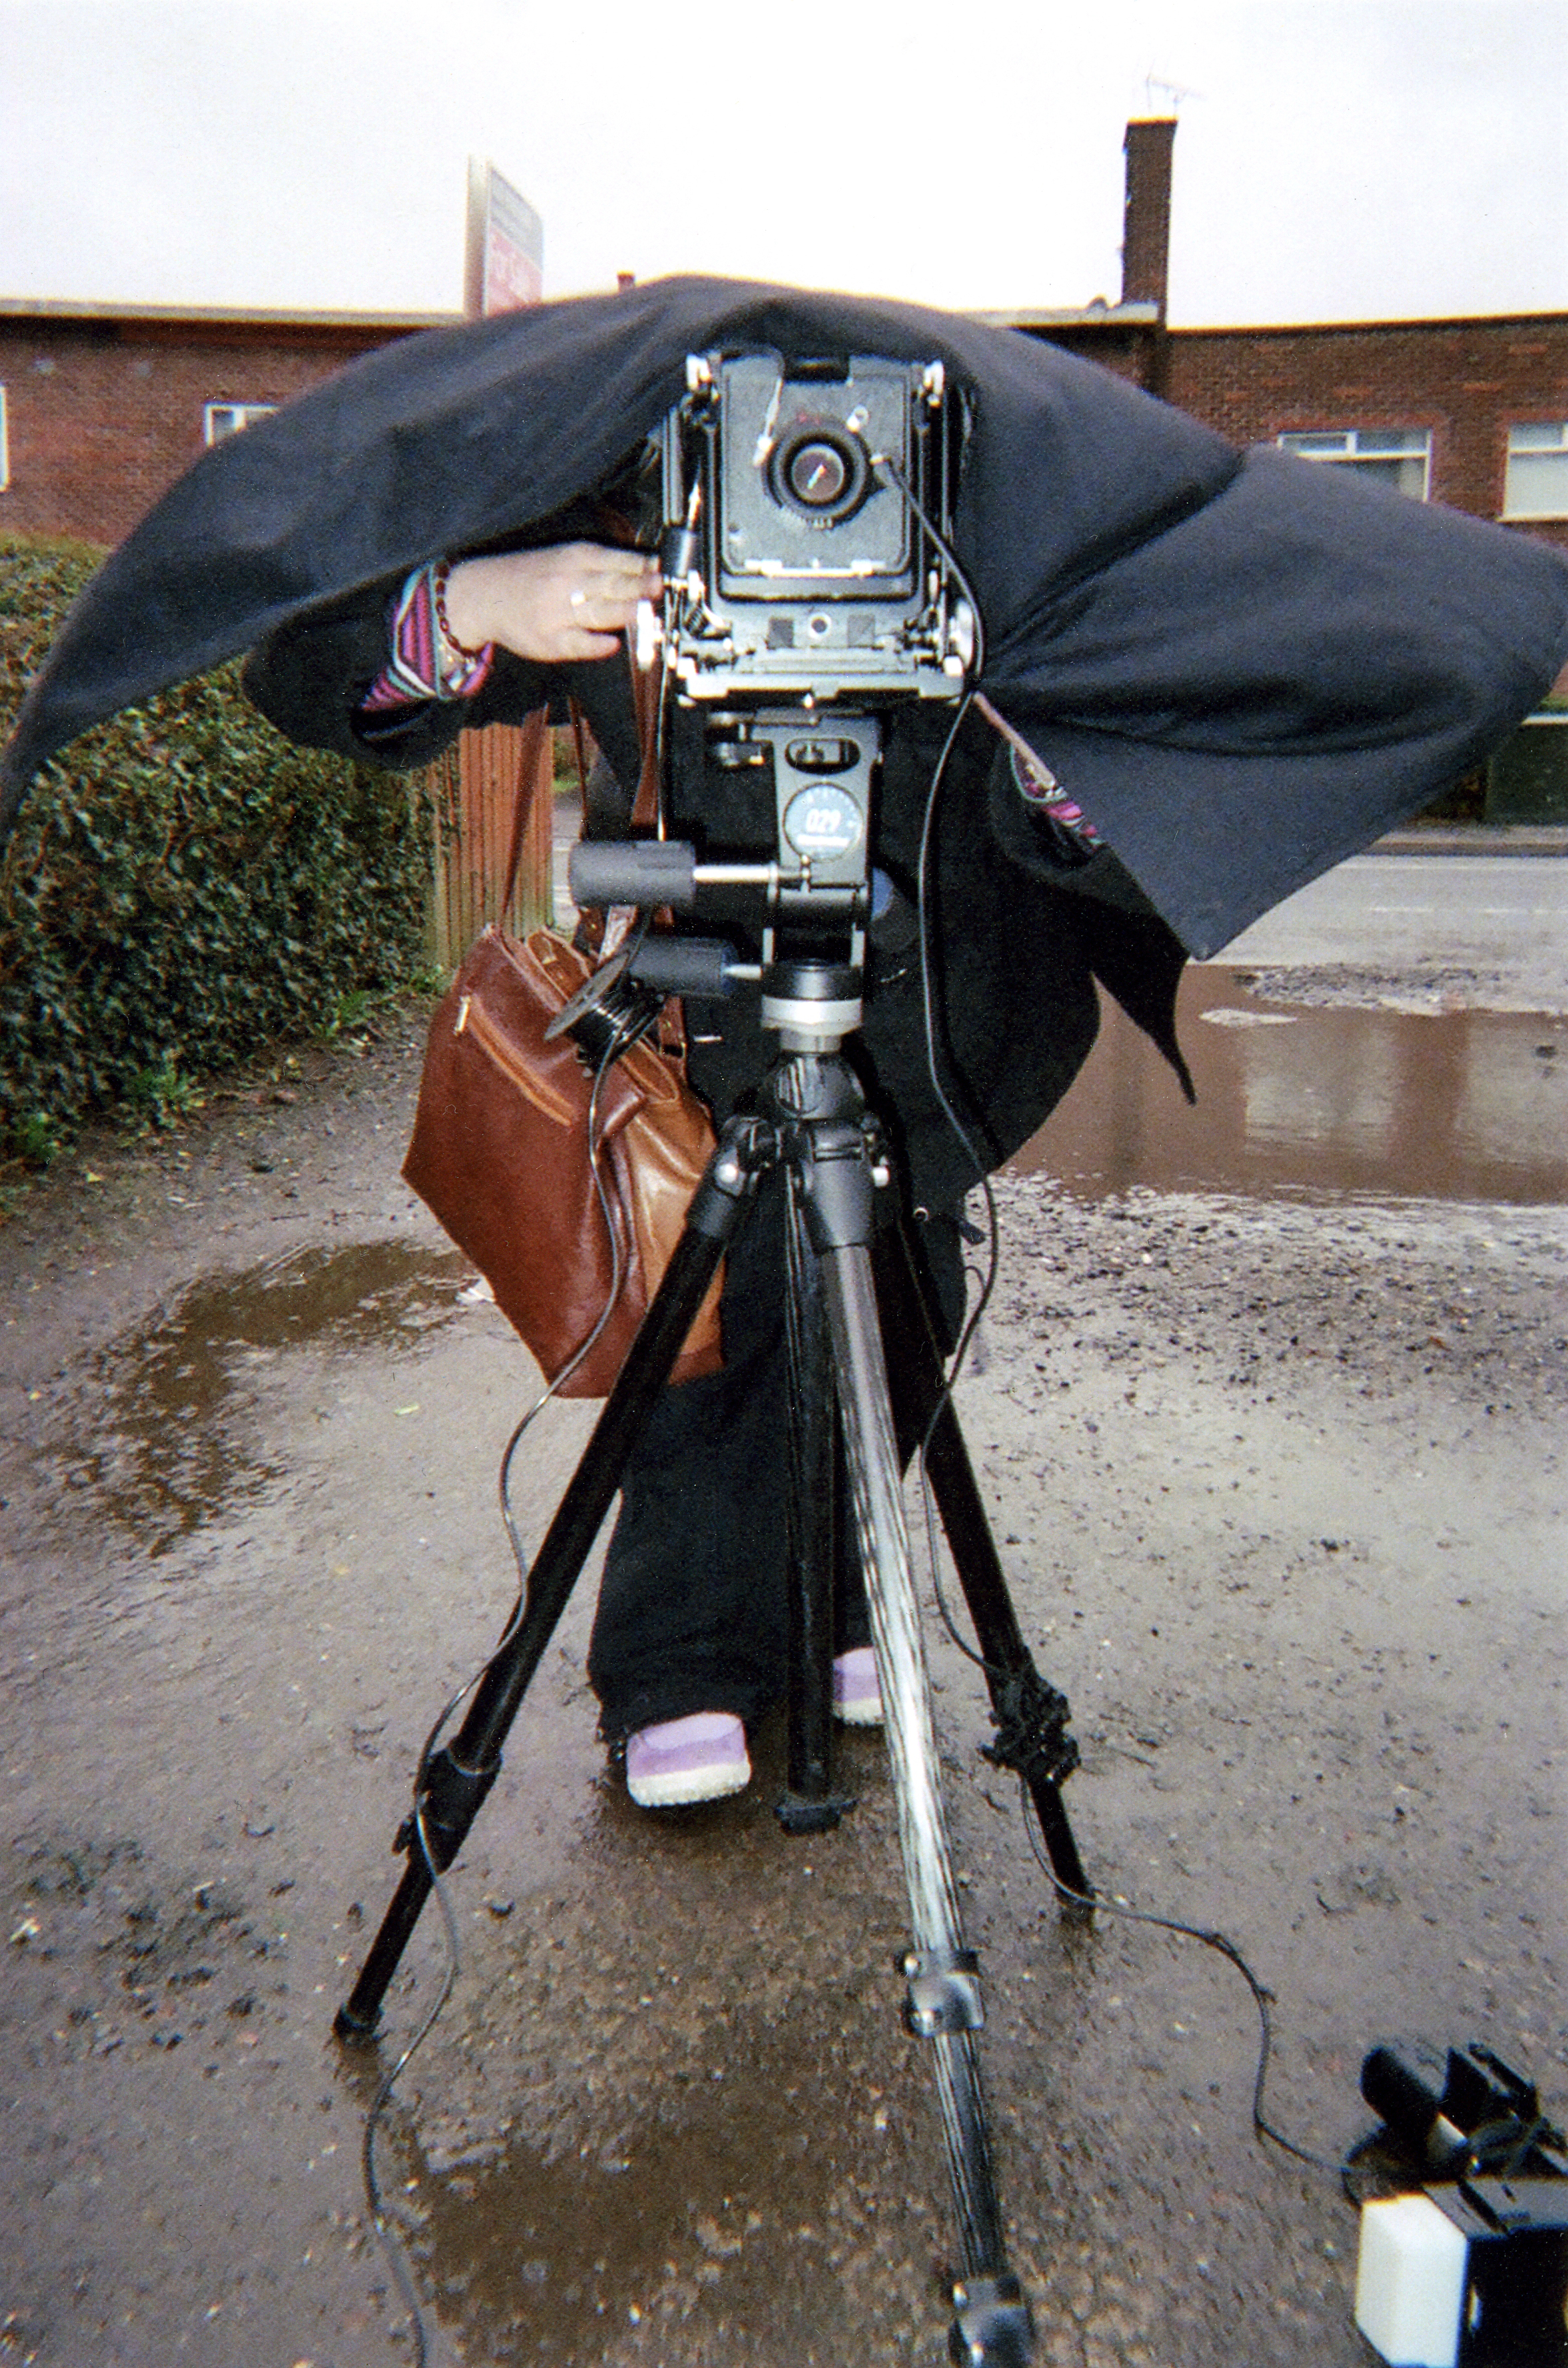 Documentation of the making of Assisted Self-Portrait of Angela Wildman, Residency, 2006–2008.